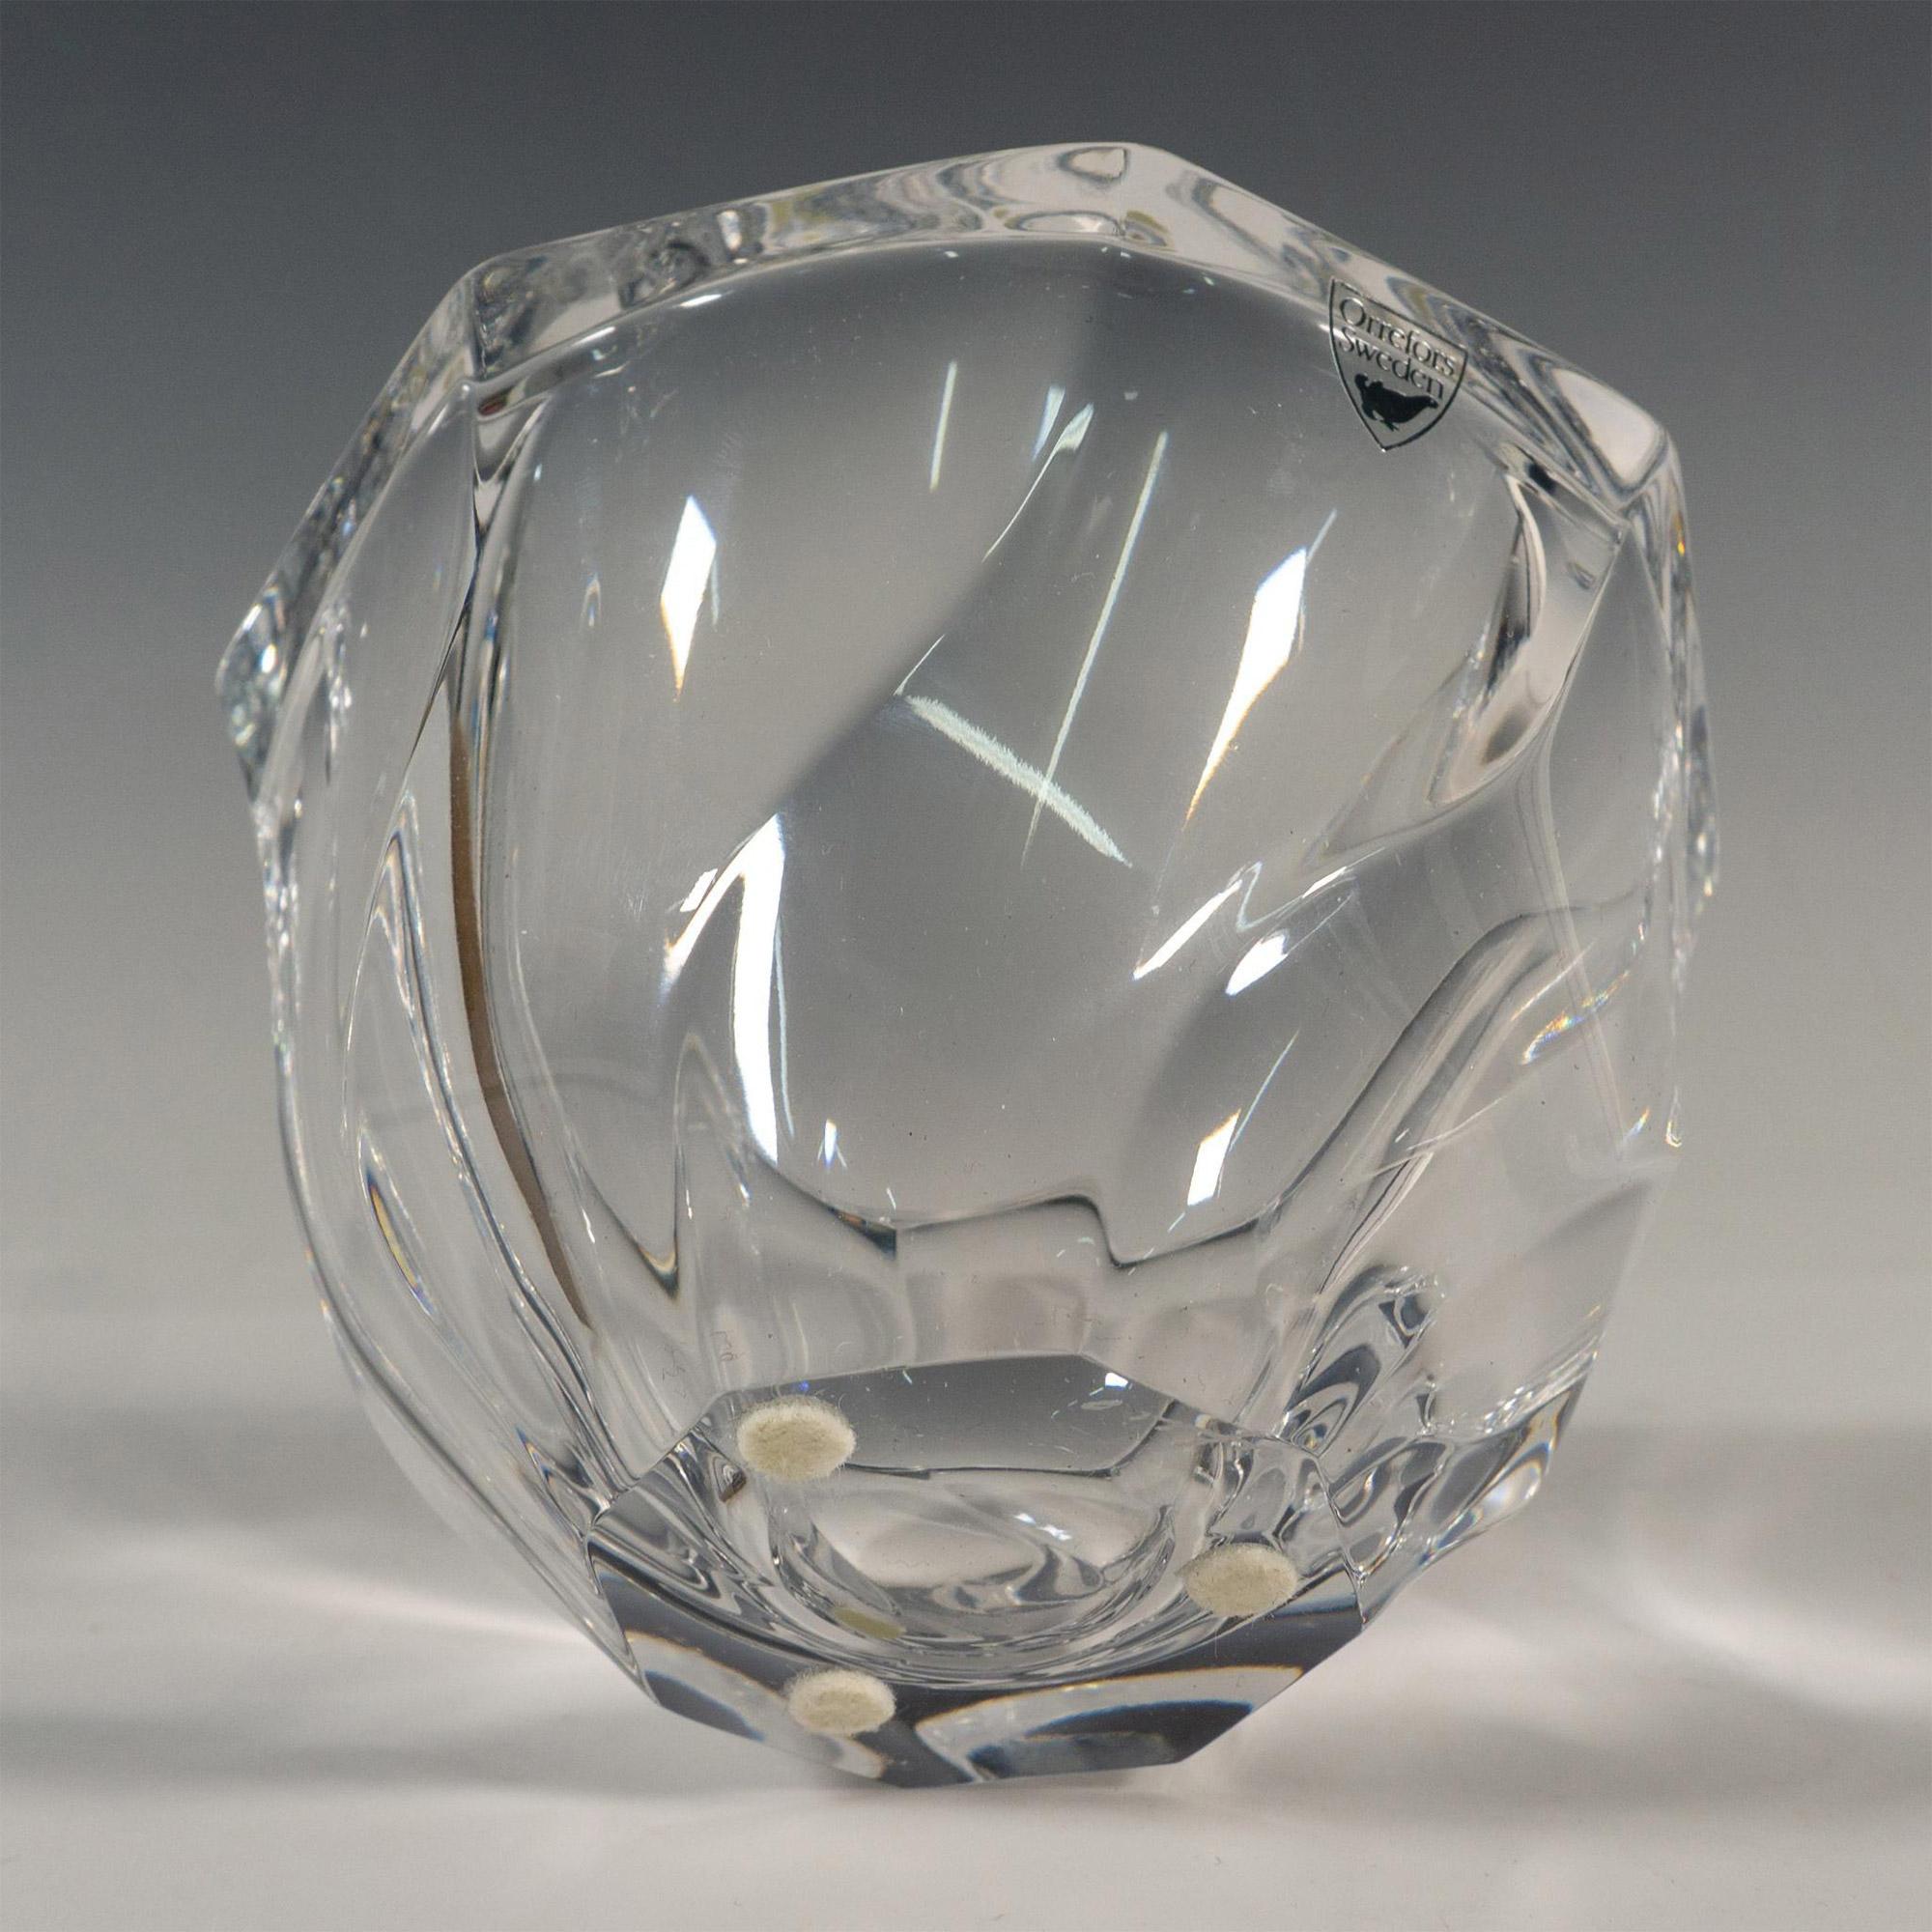 Orrefors by Olle Alberius Crystal Bowl, Residence - Image 4 of 4